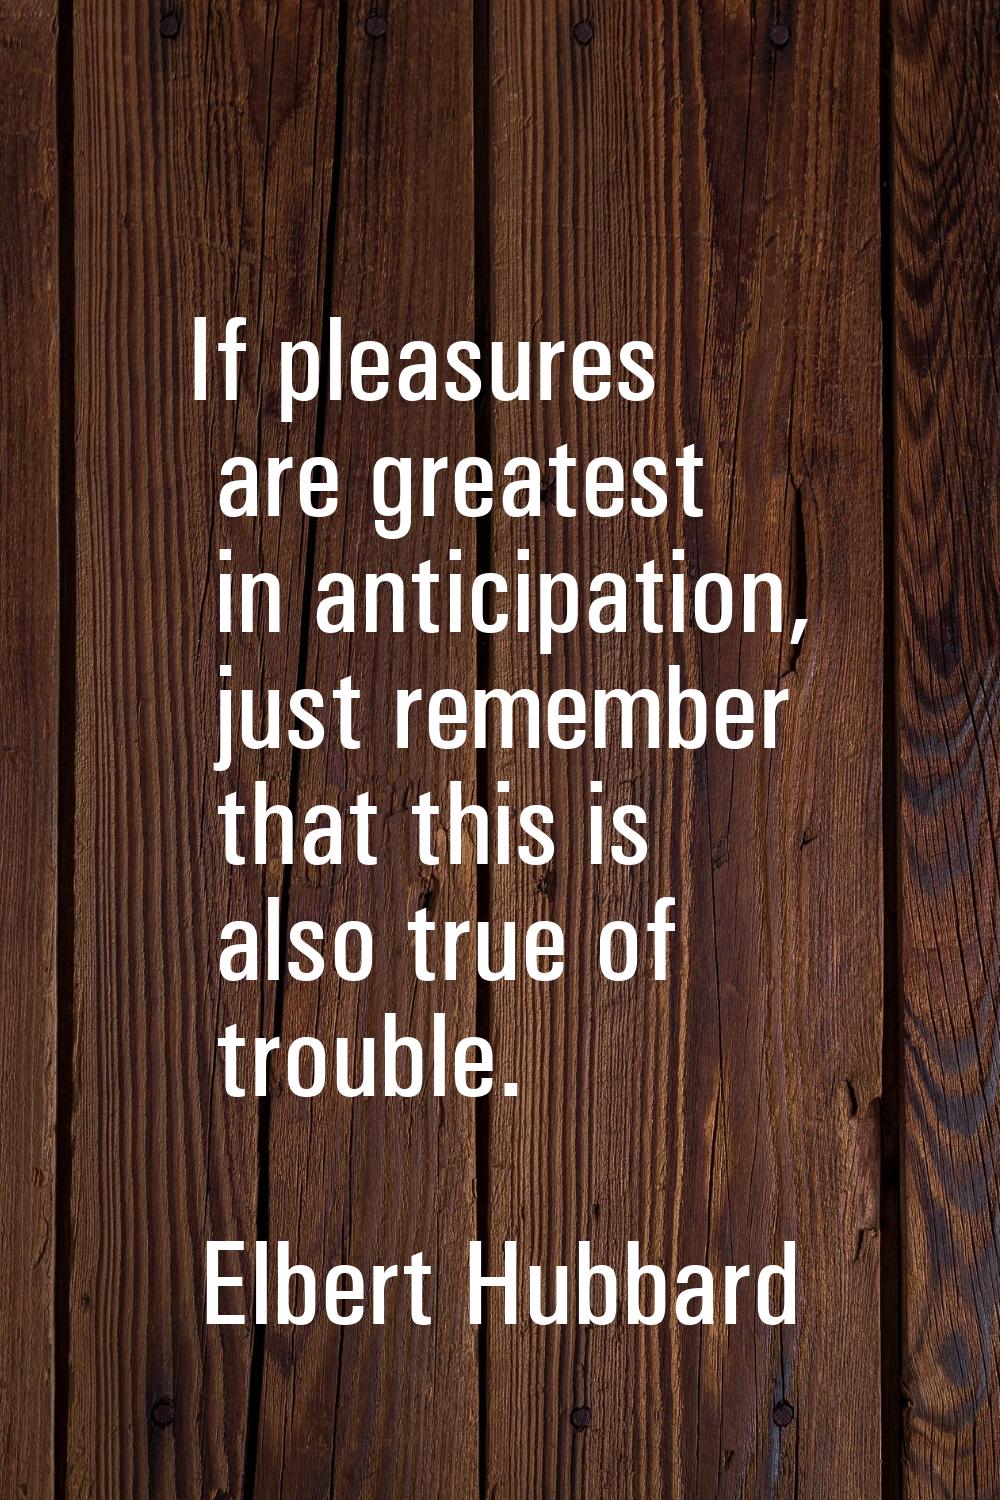 If pleasures are greatest in anticipation, just remember that this is also true of trouble.